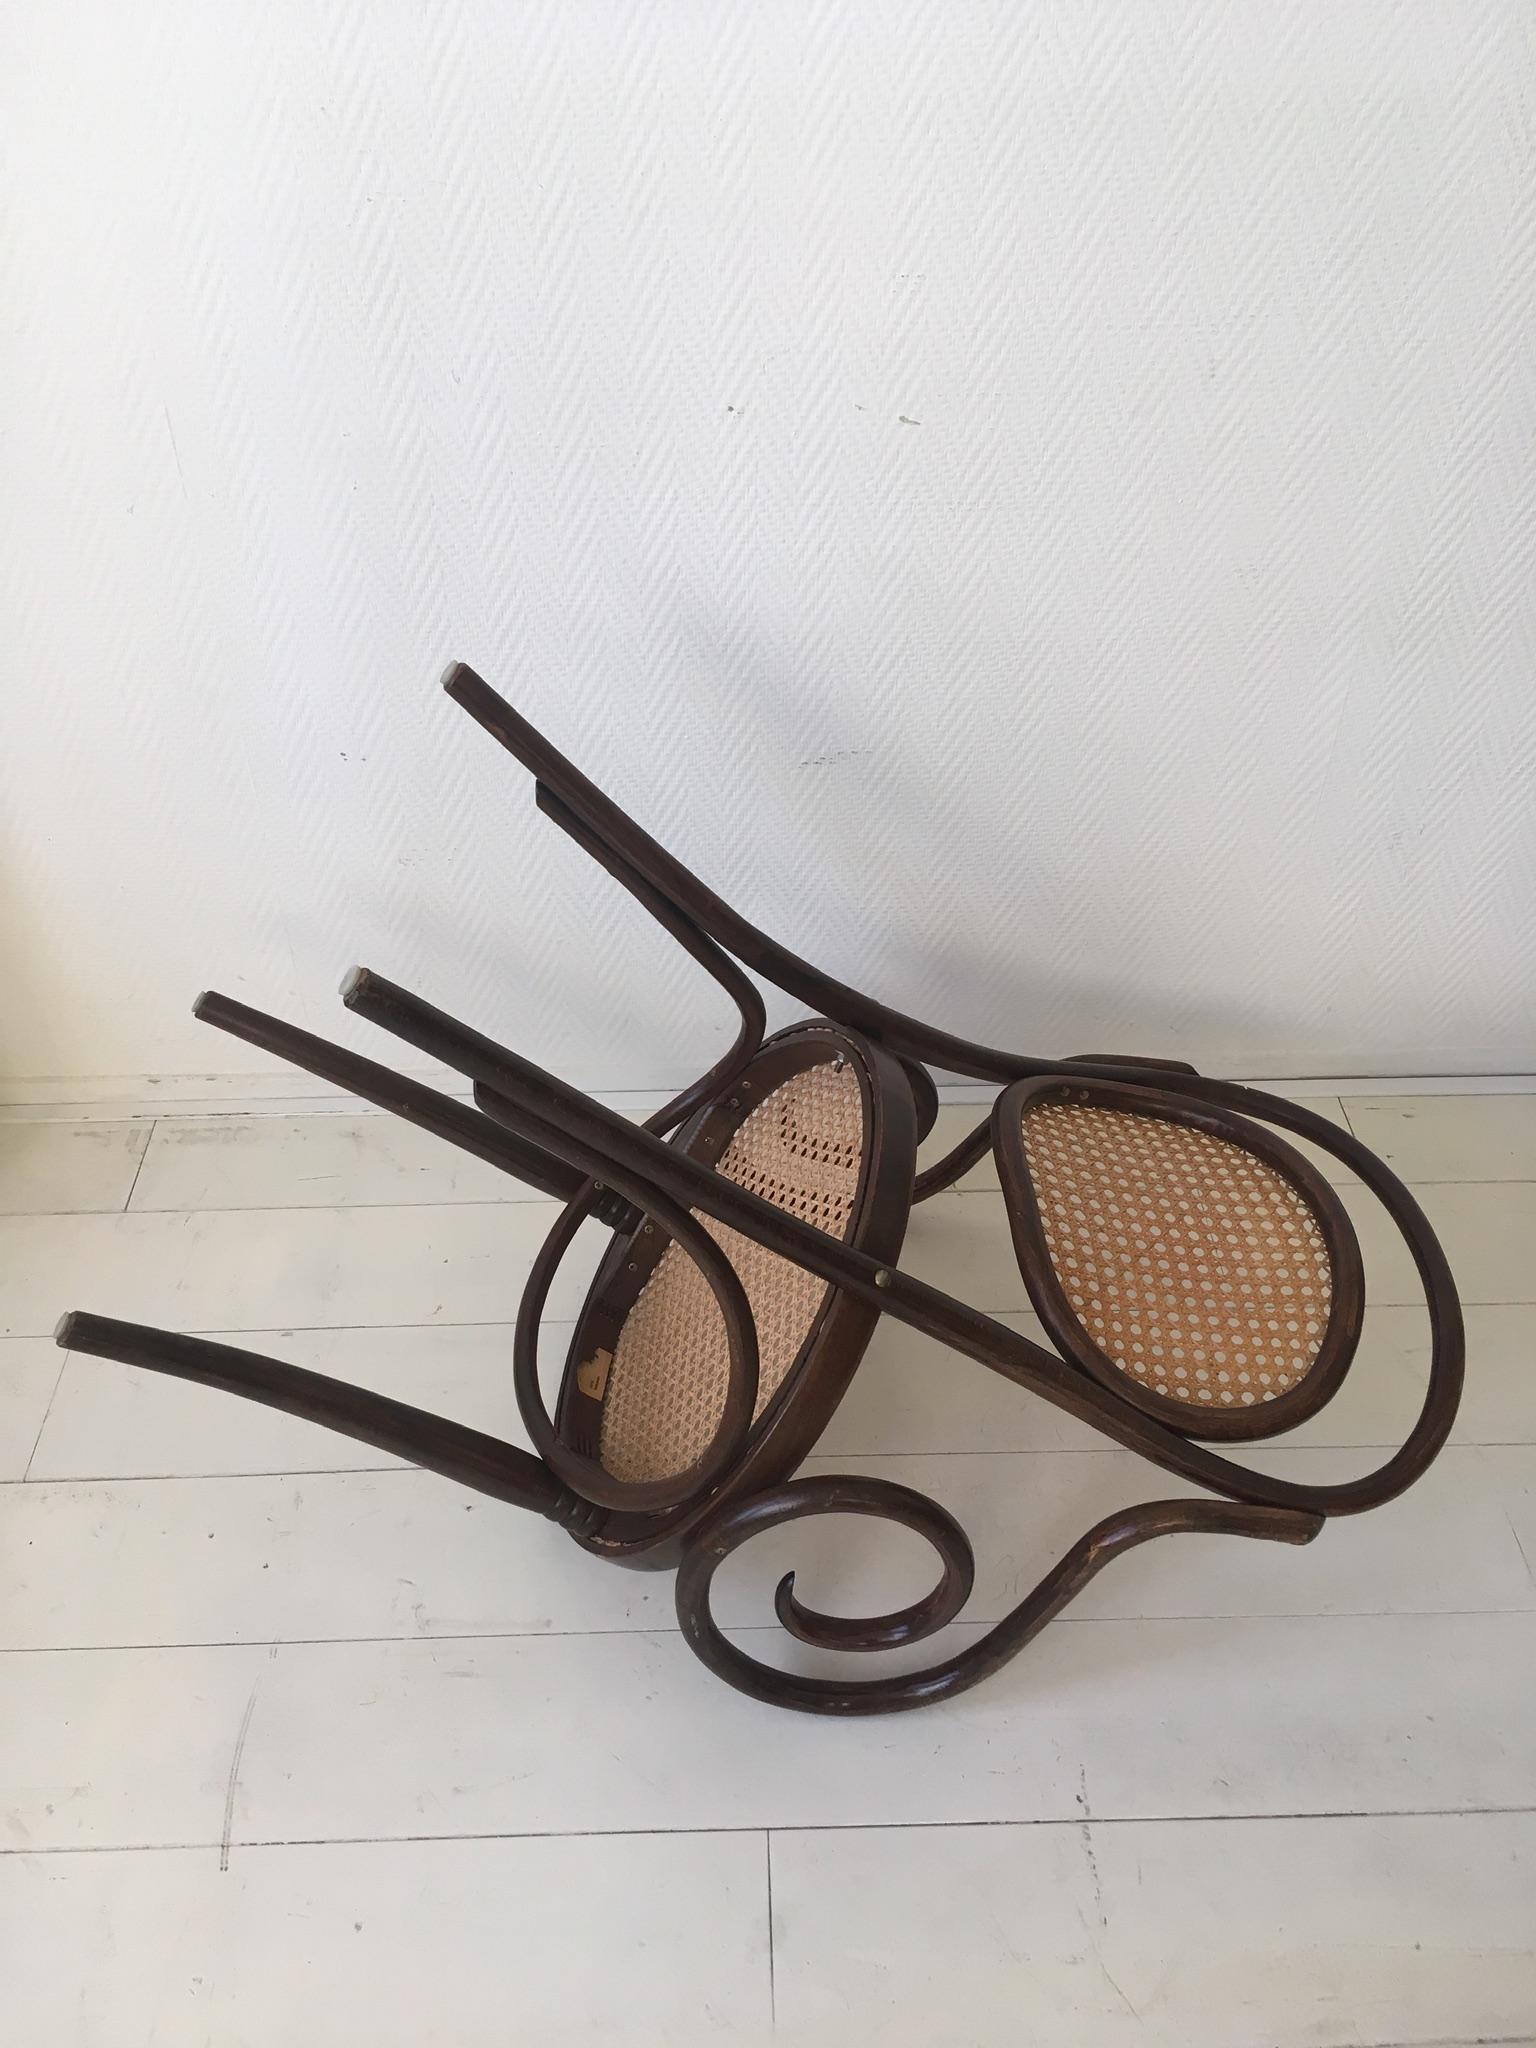 ZPM Radomsko, Former Thonet, No. 11 Bentwood and Rattan Dining Room Chairs 2